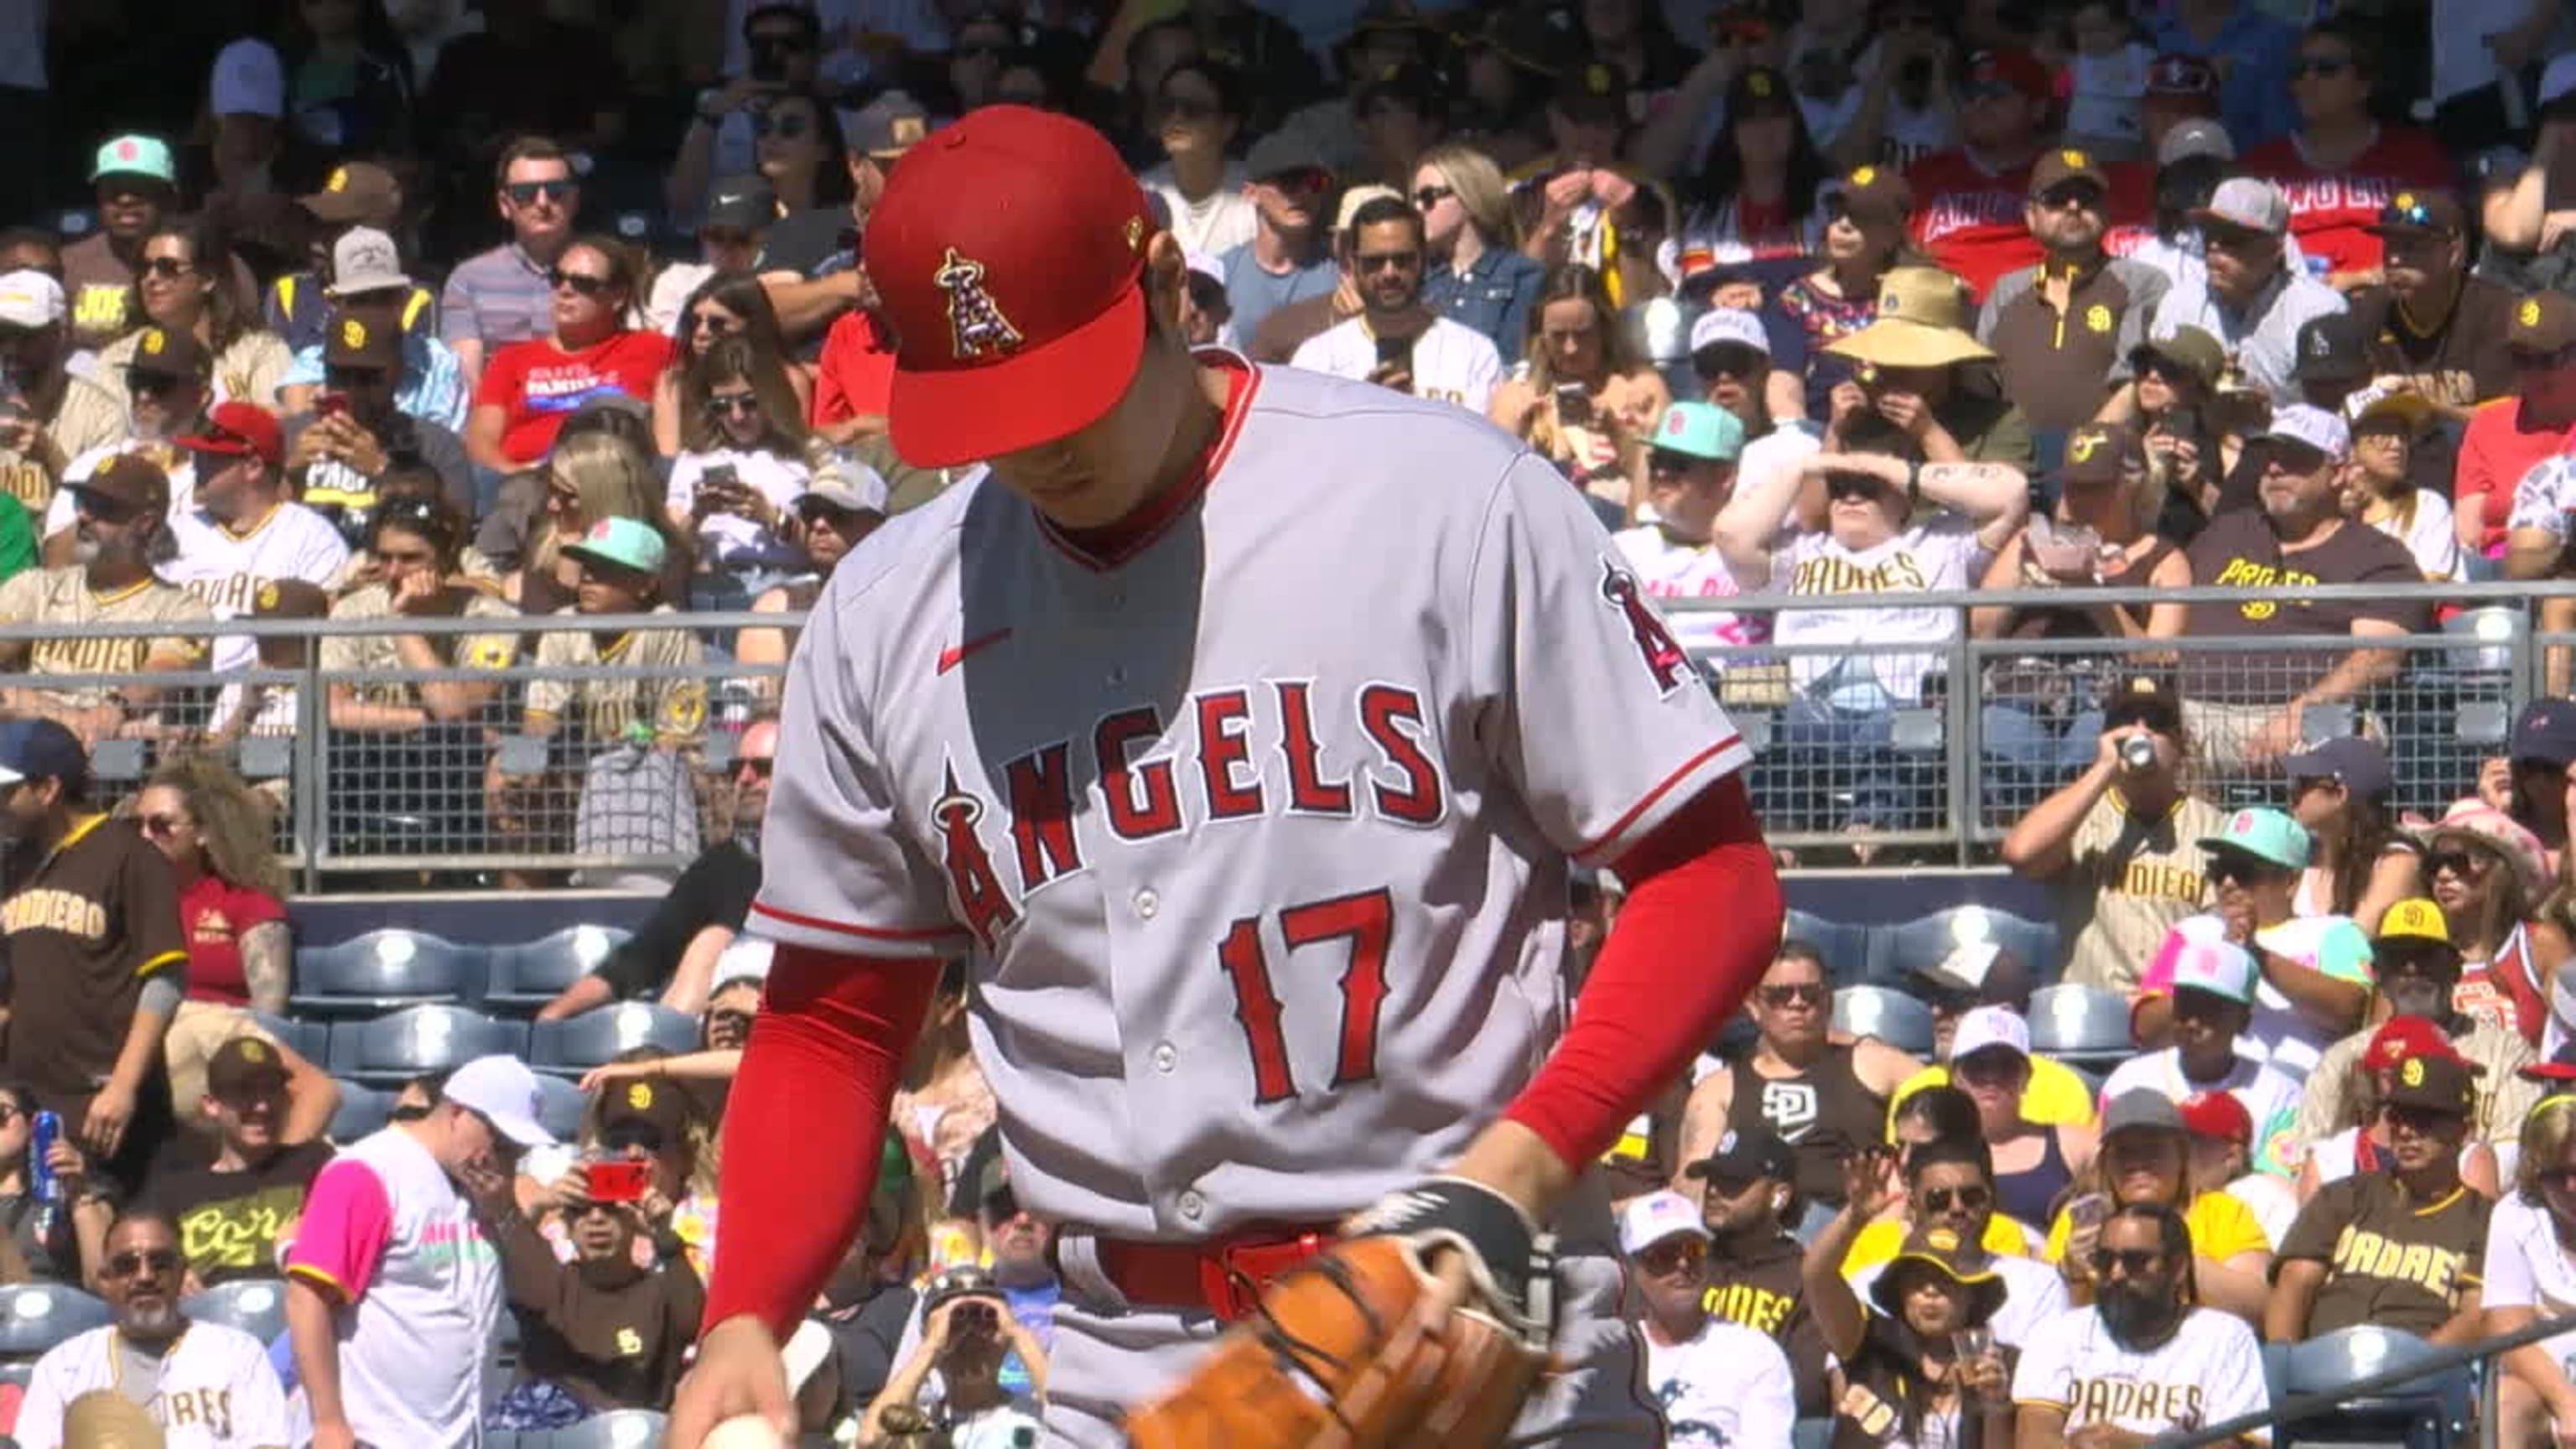 Shohei Ohtani allows 5 runs while dealing with blister in Angels